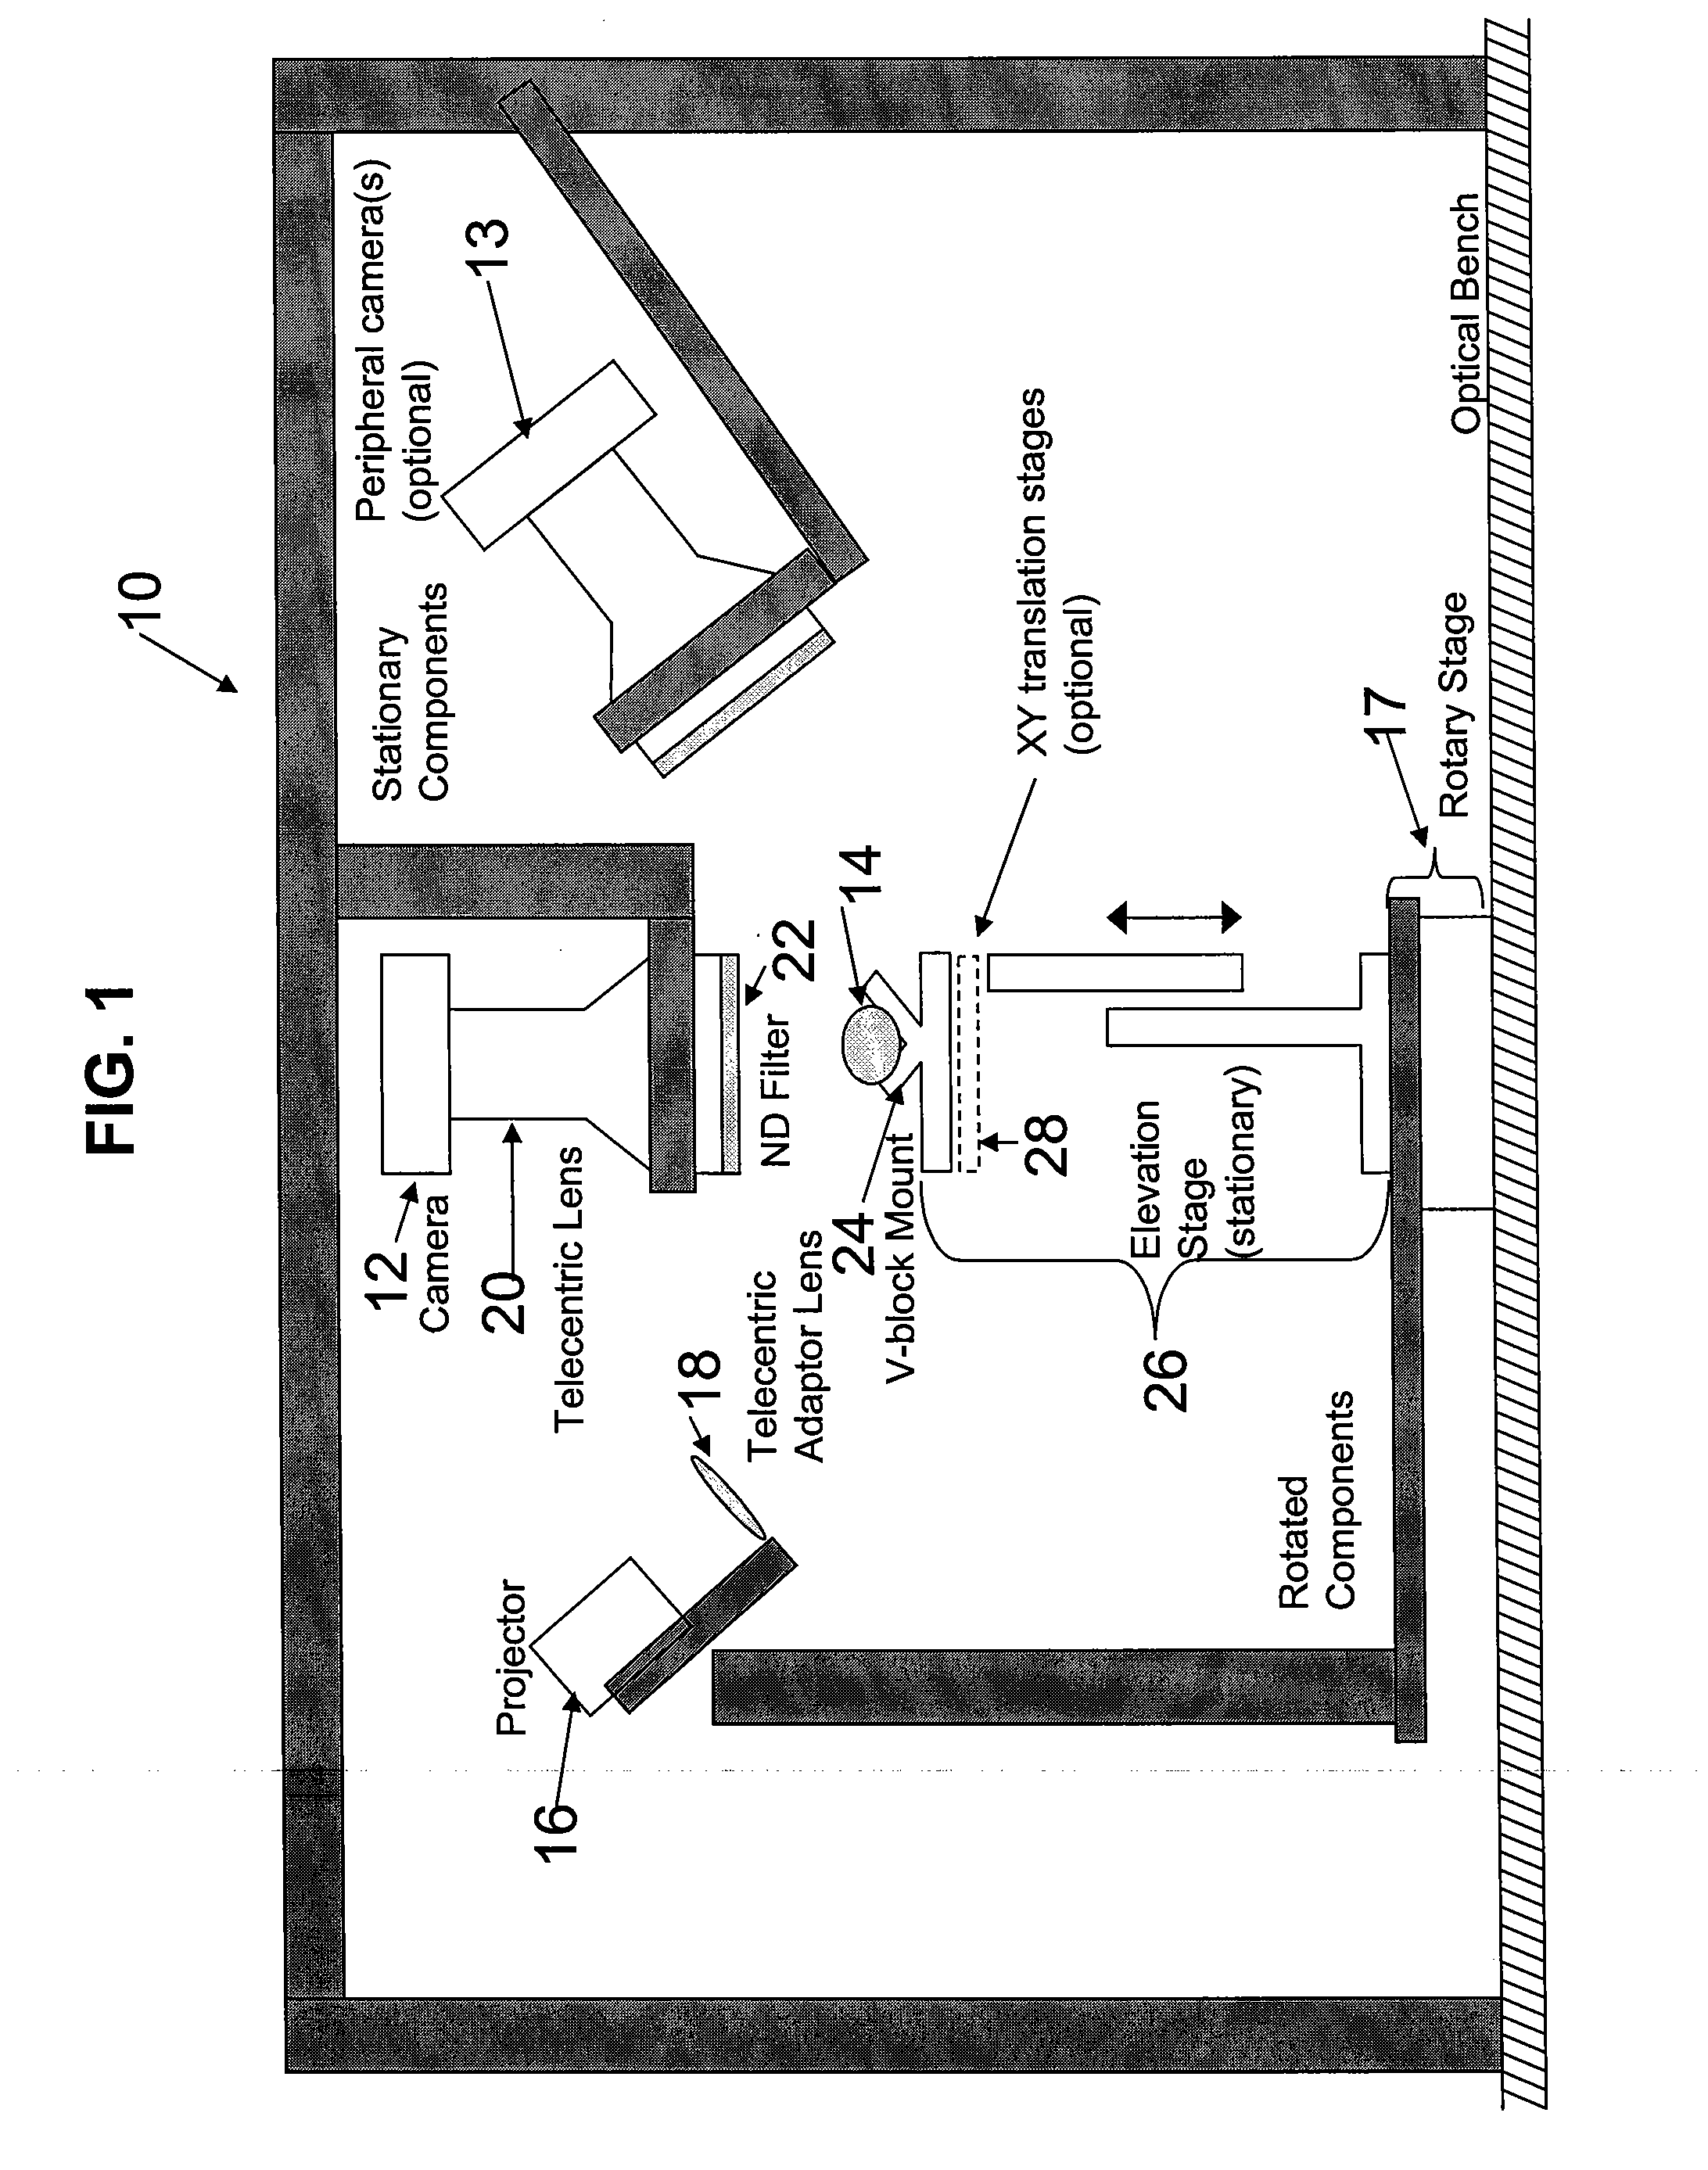 Apparatus and Method for 3-Dimensional Scanning of an Object